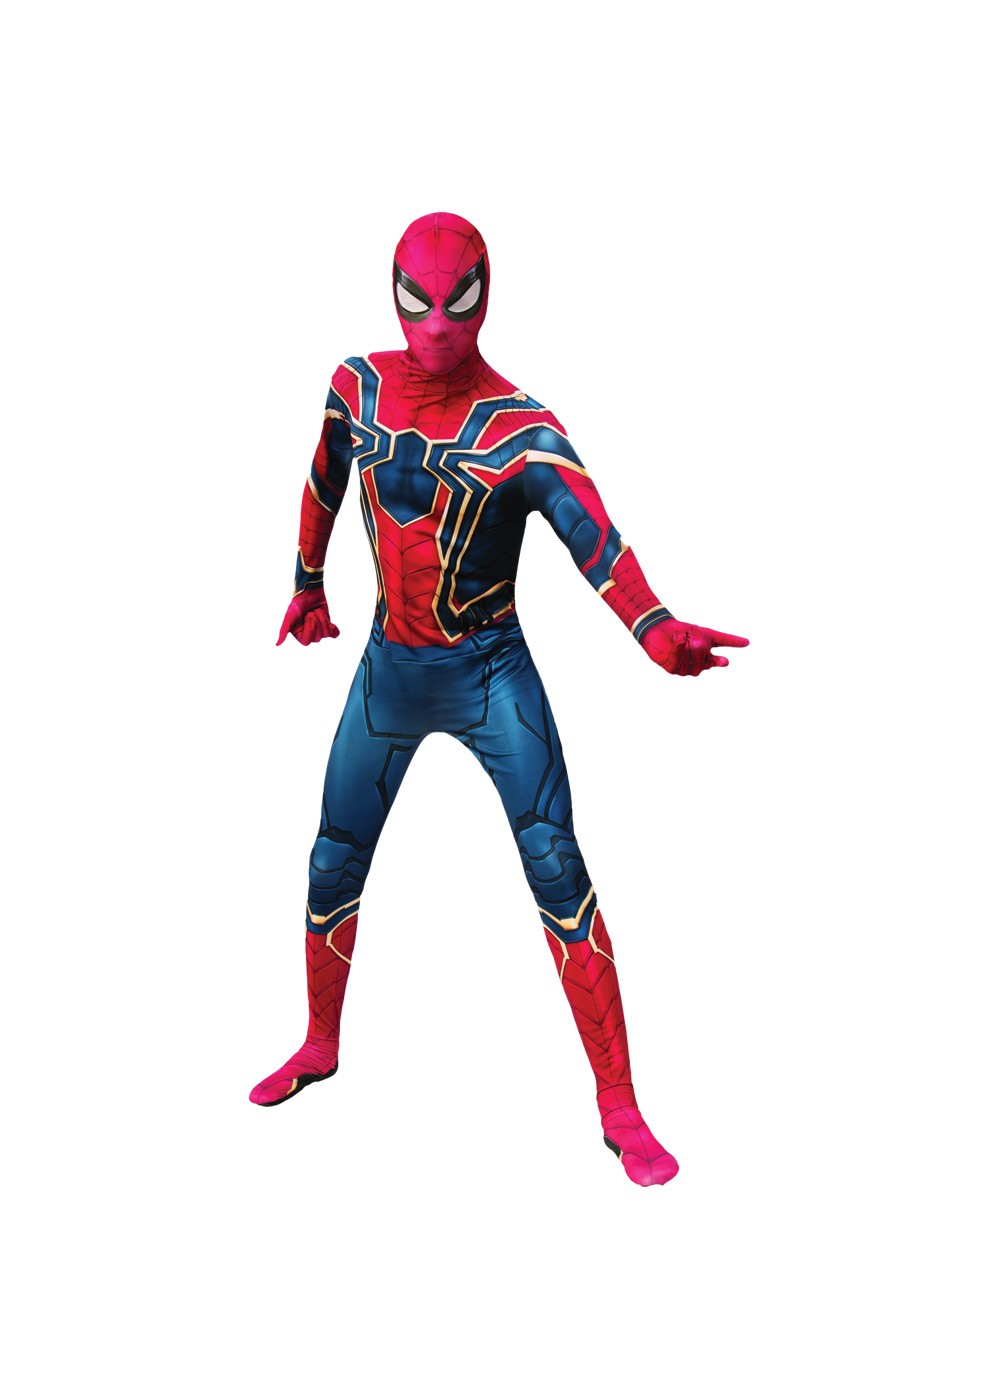 Endgame 2nd Skin Suit Iron Spider Costume